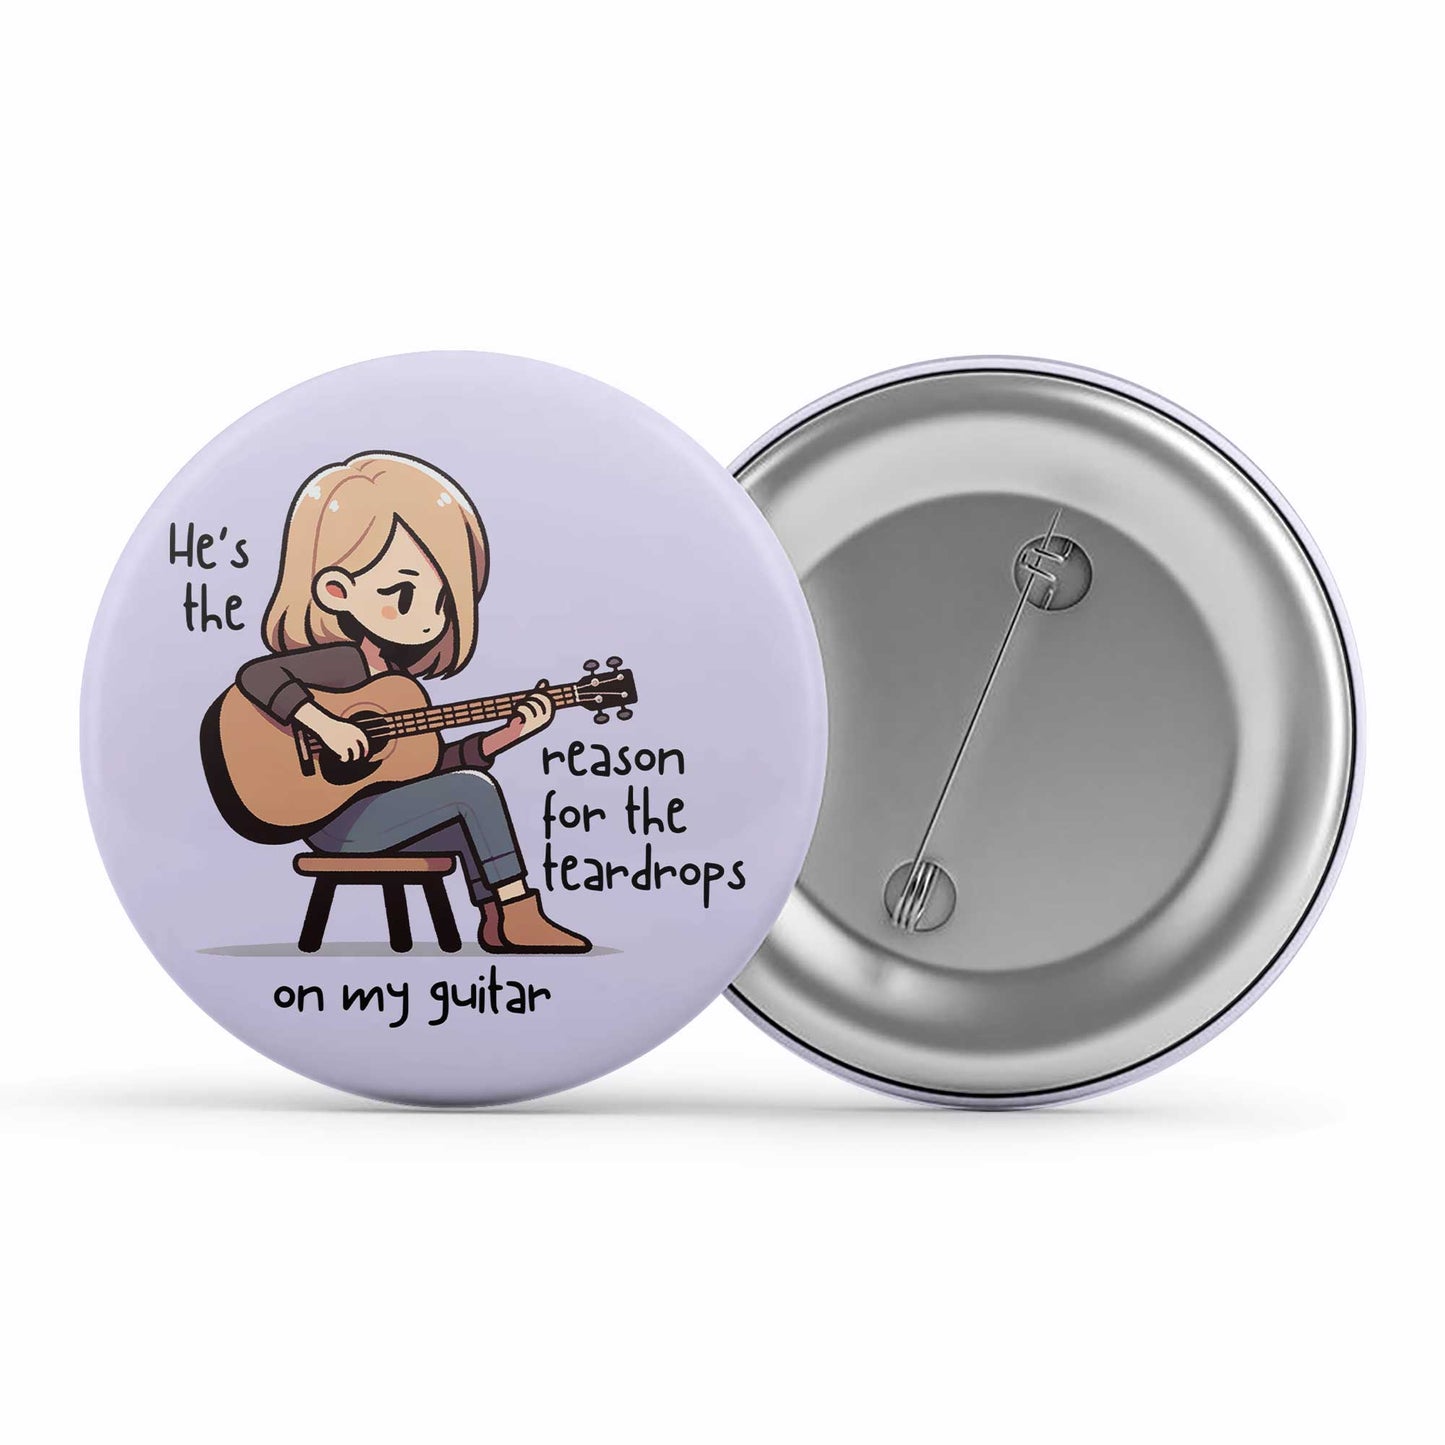 taylor swift tear drops on my guitar badge pin button music band buy online india the banyan tee tbt men women girls boys unisex